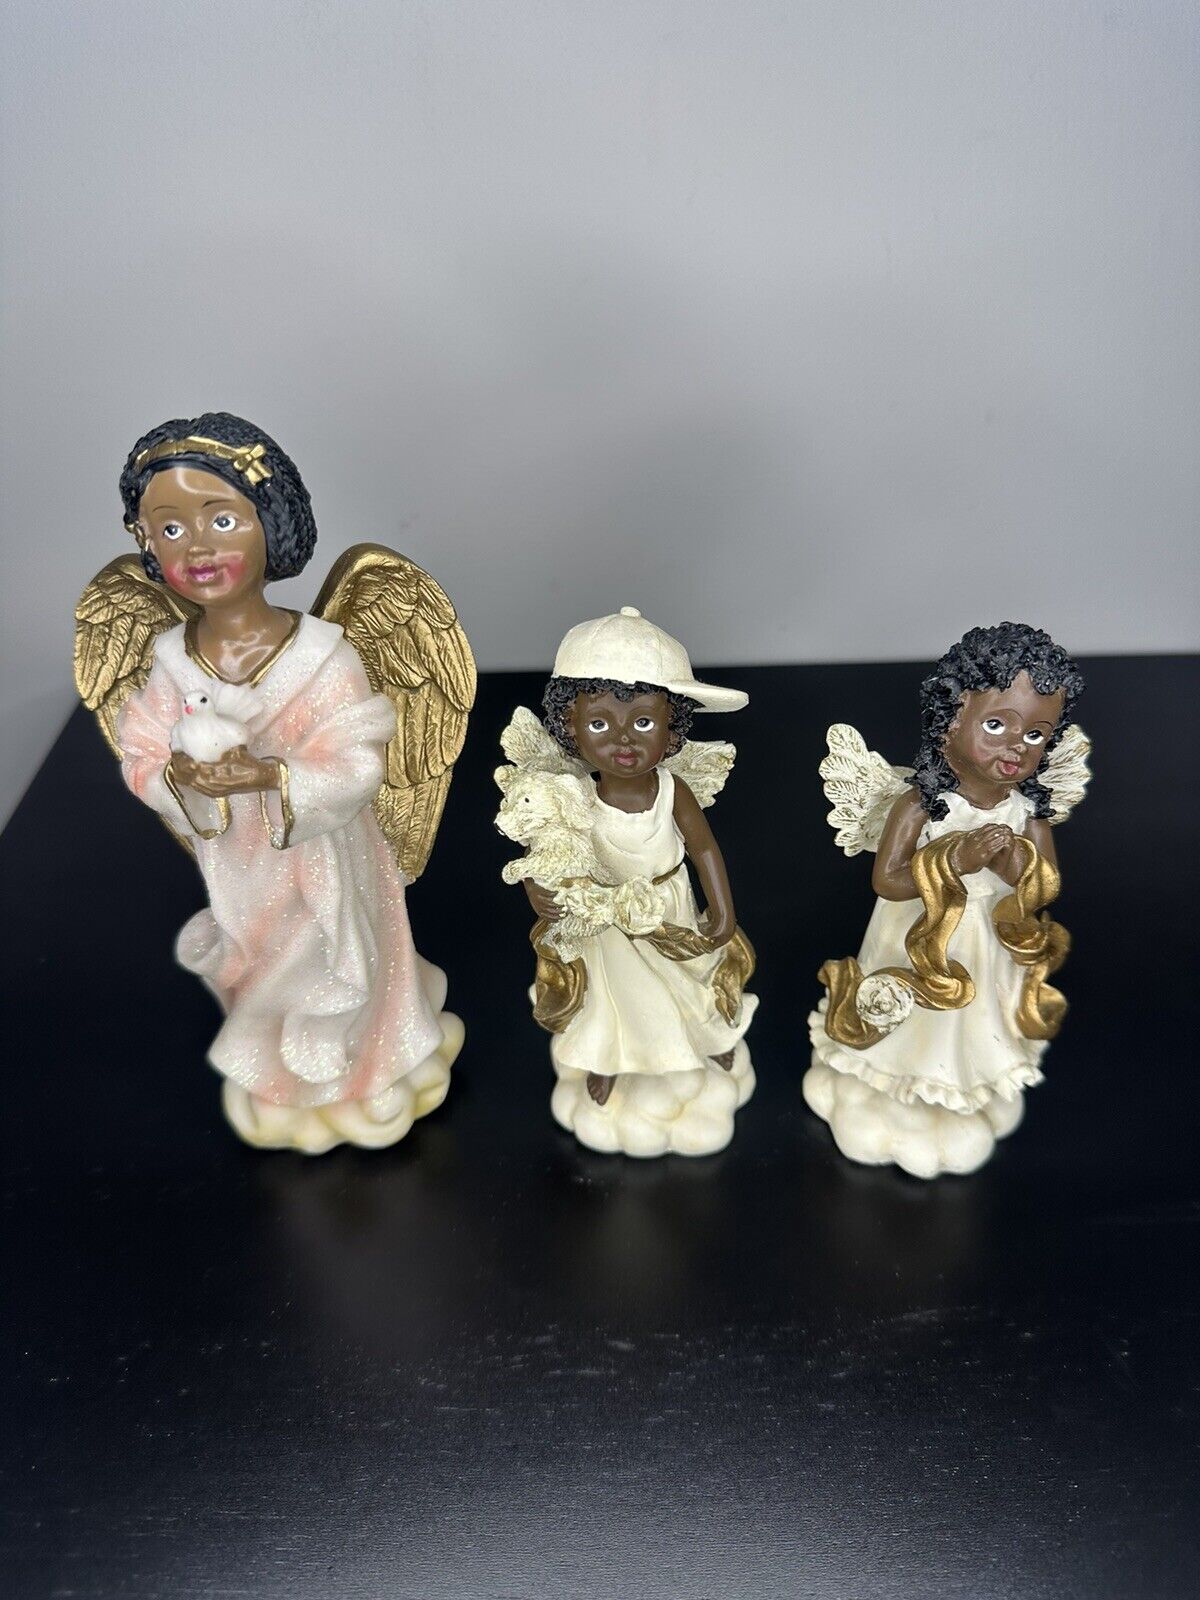 Set of 3 African American Angel Figurines - Handcrafted with Golden Accents